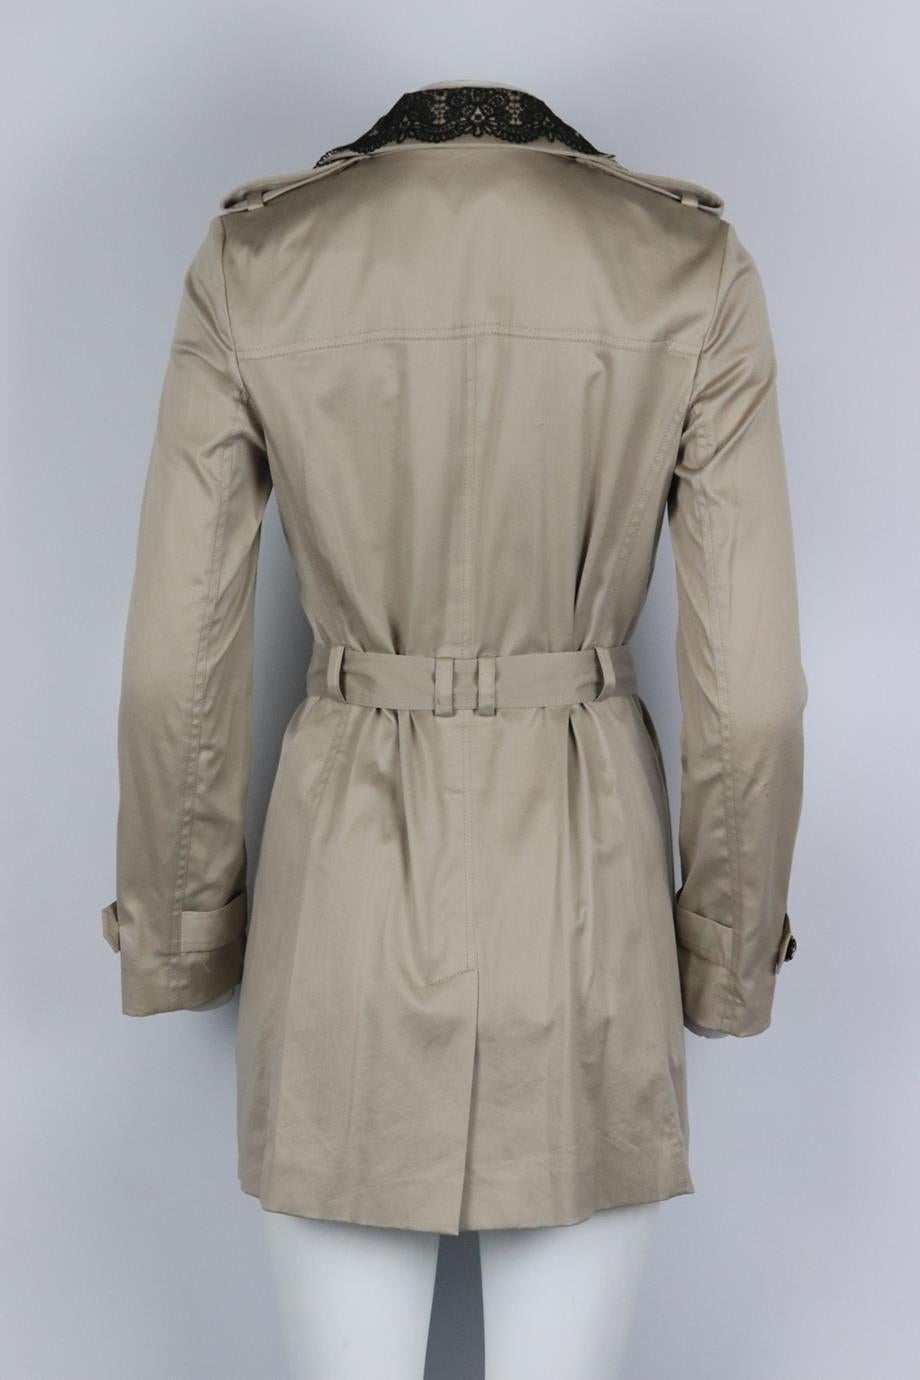 Gray La Perla Belted Double Breasted Satin Trench Coat It 42 Uk 10